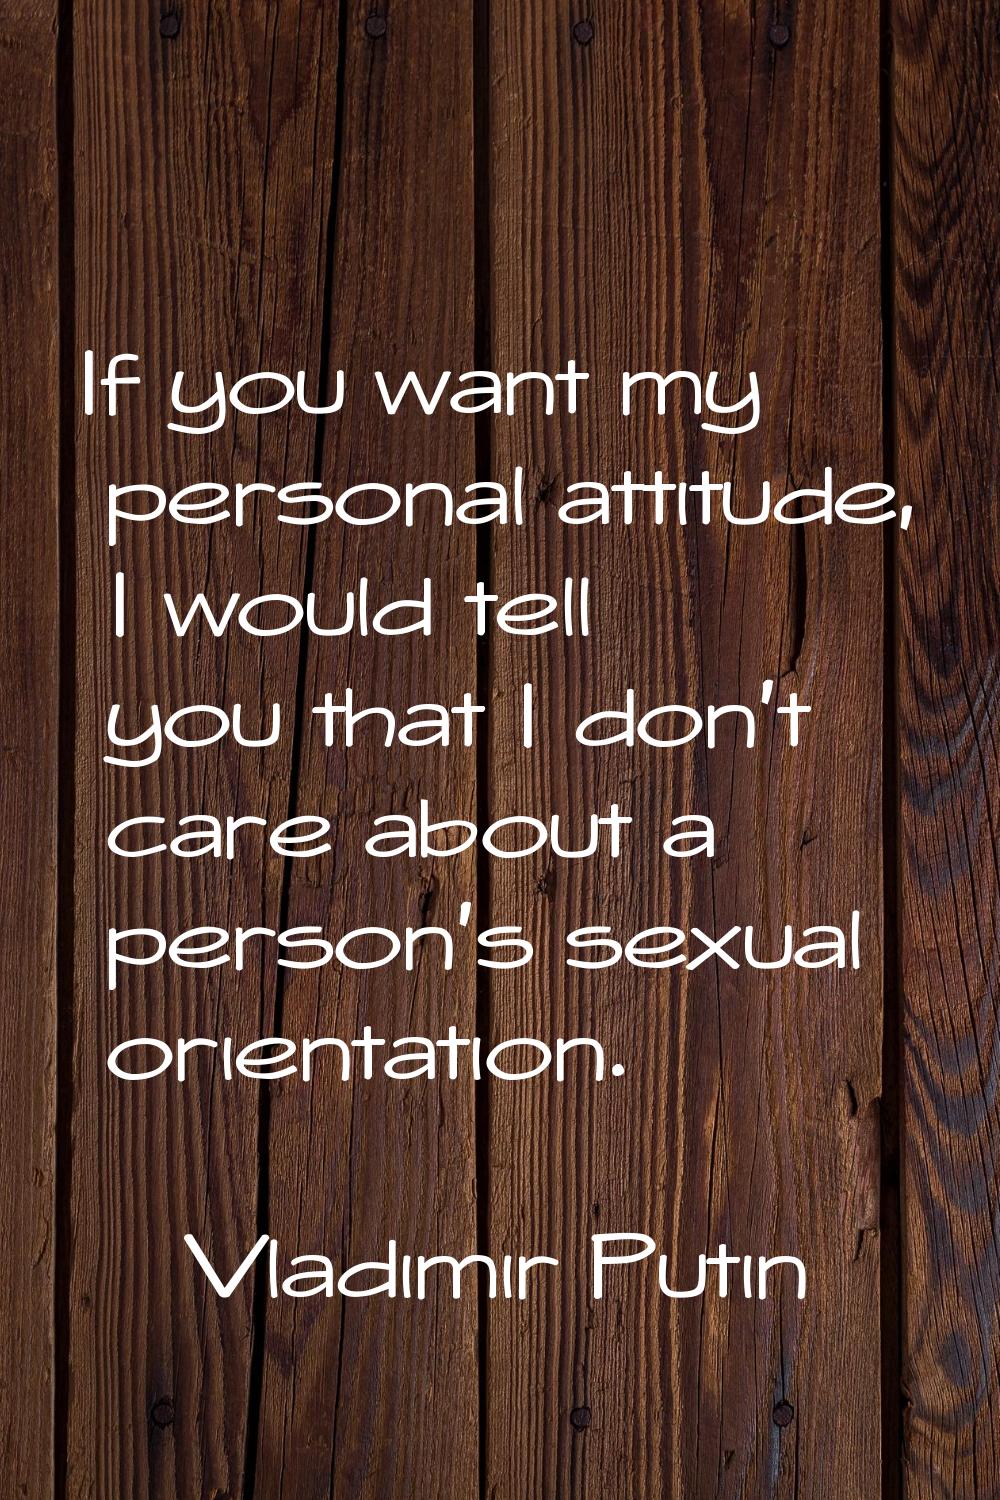 If you want my personal attitude, I would tell you that I don't care about a person's sexual orient